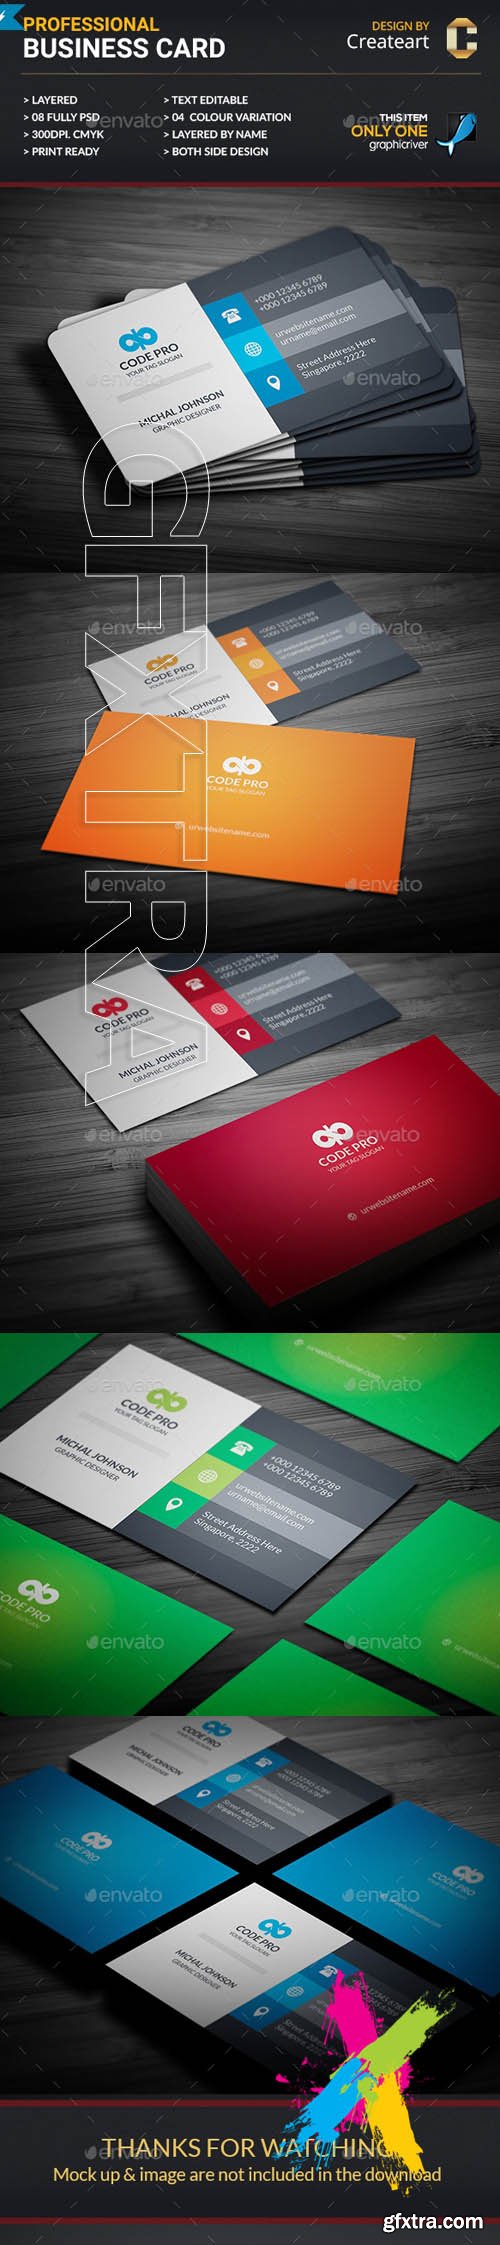 Graphicriver - Business Card 20223686